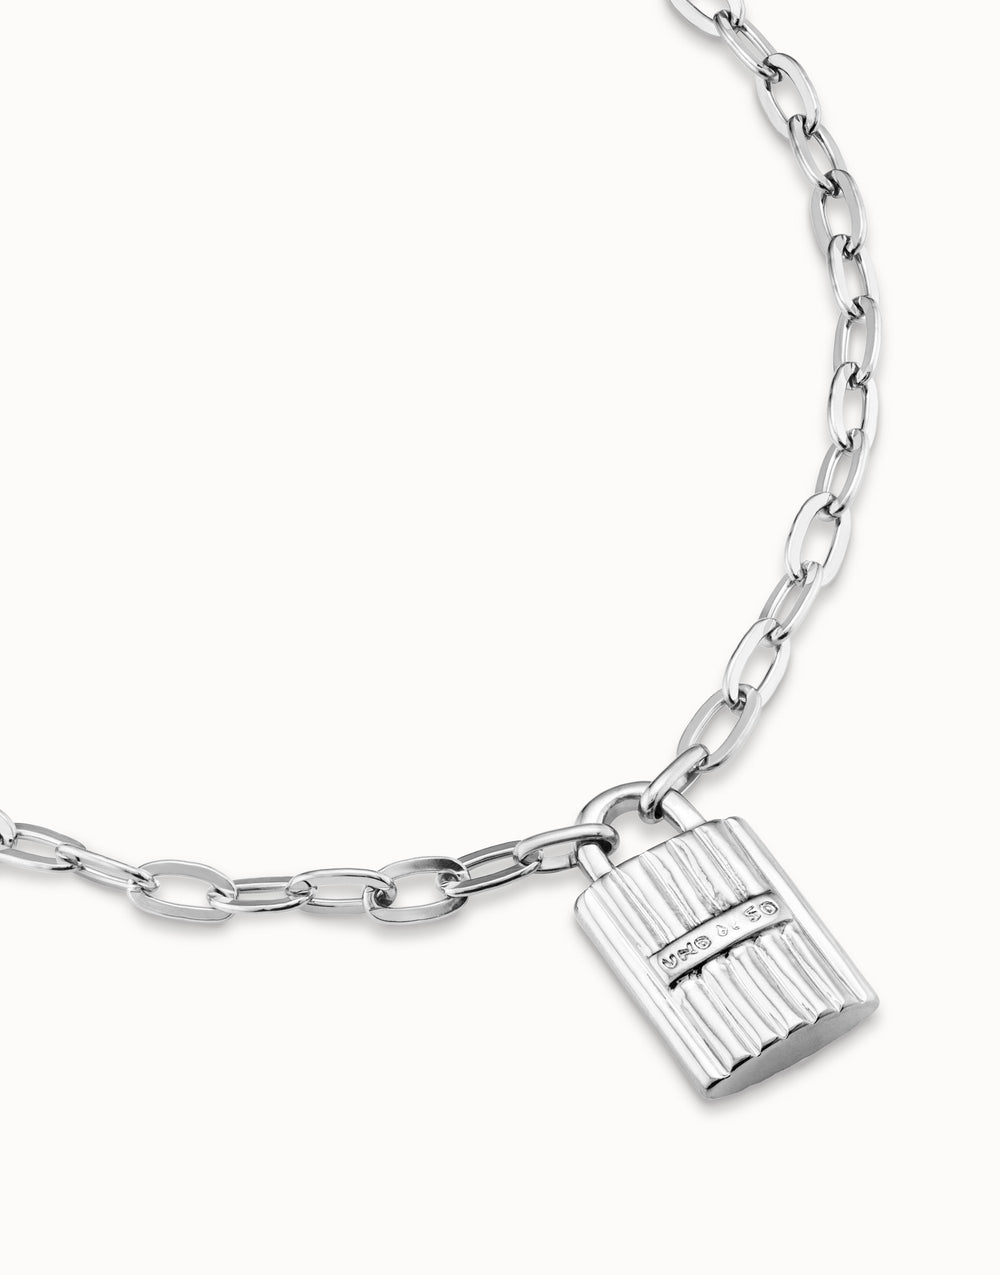 MAGIC KEY NECKLACE SILVER - Kingfisher Road - Online Boutique